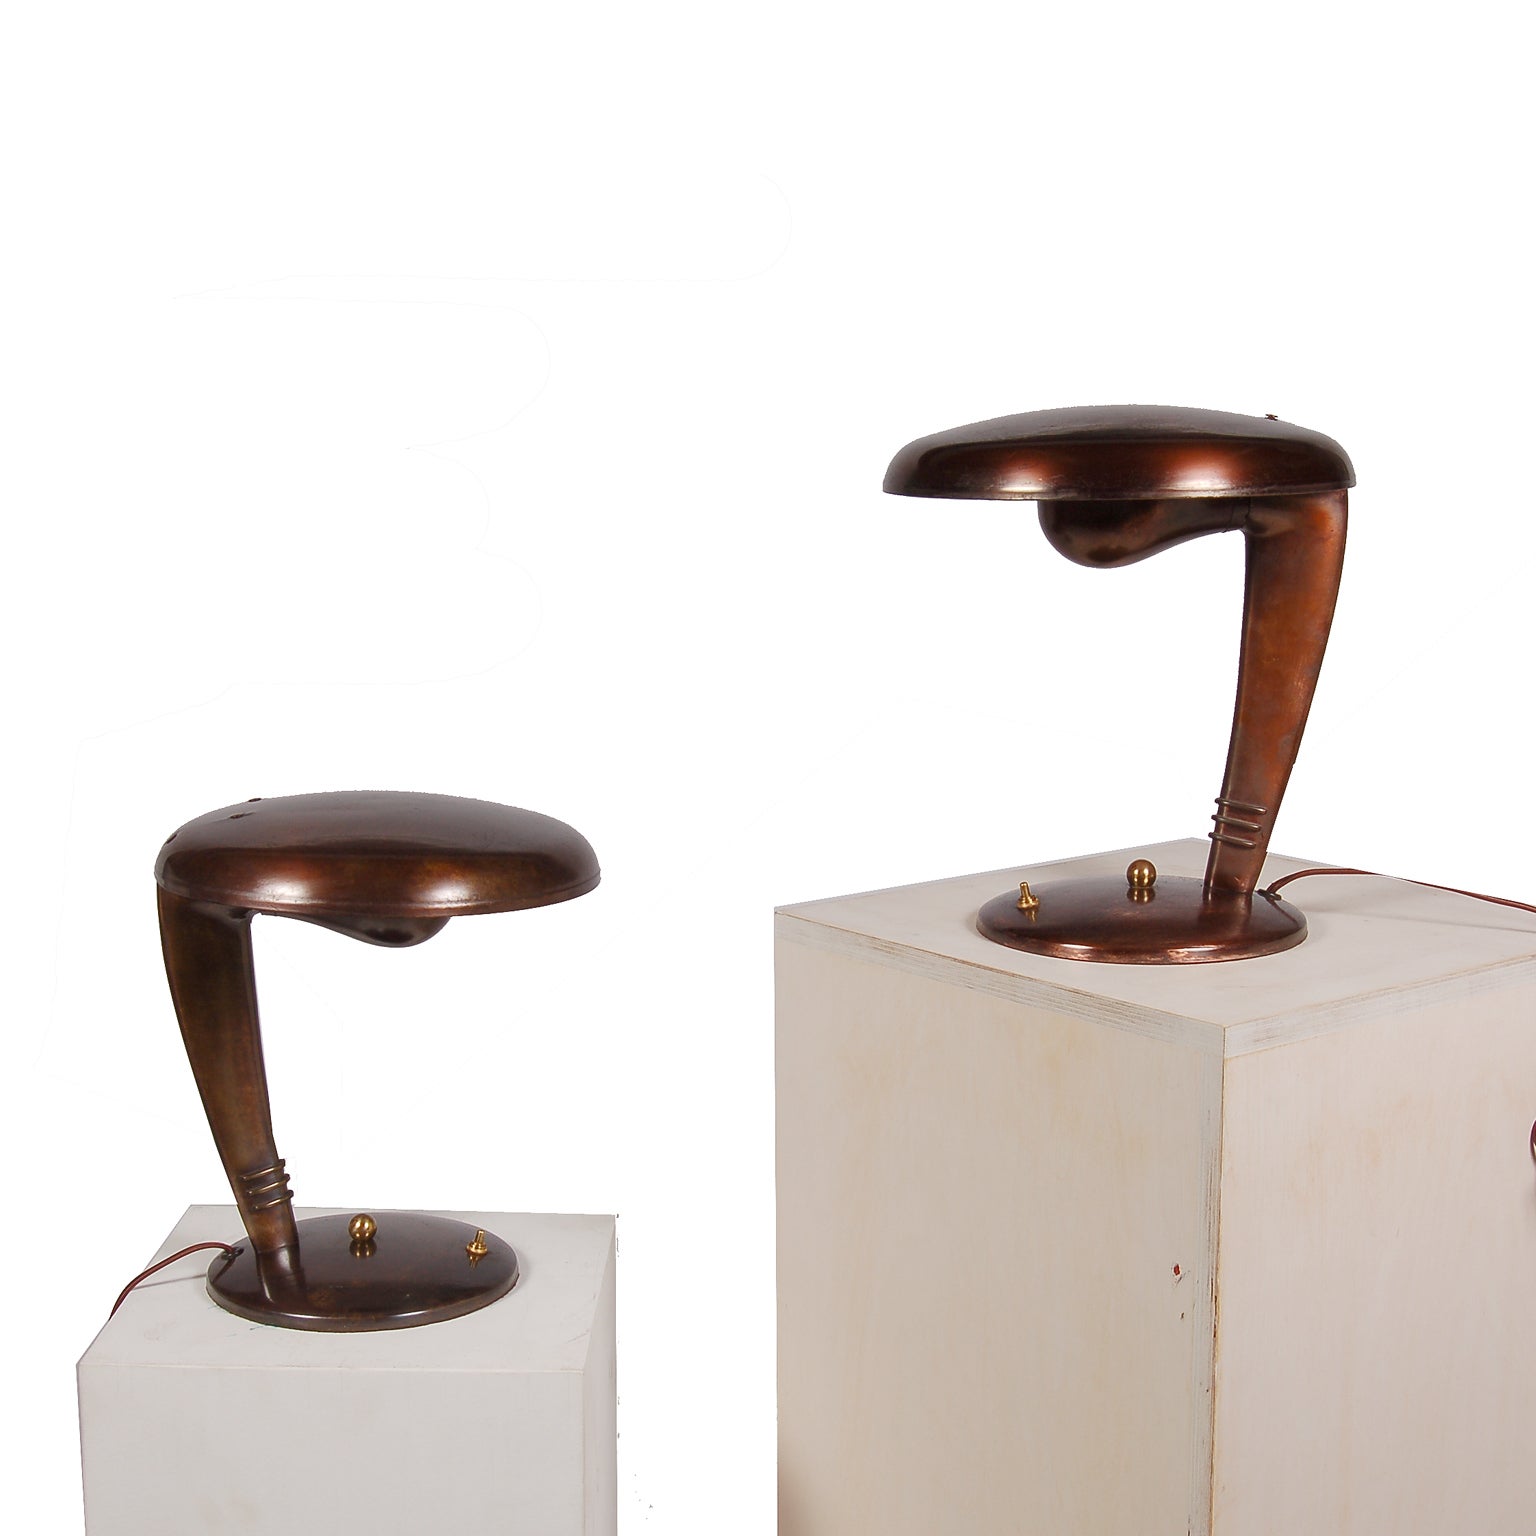 Cobra Table Lamp by Norman bel Geddes